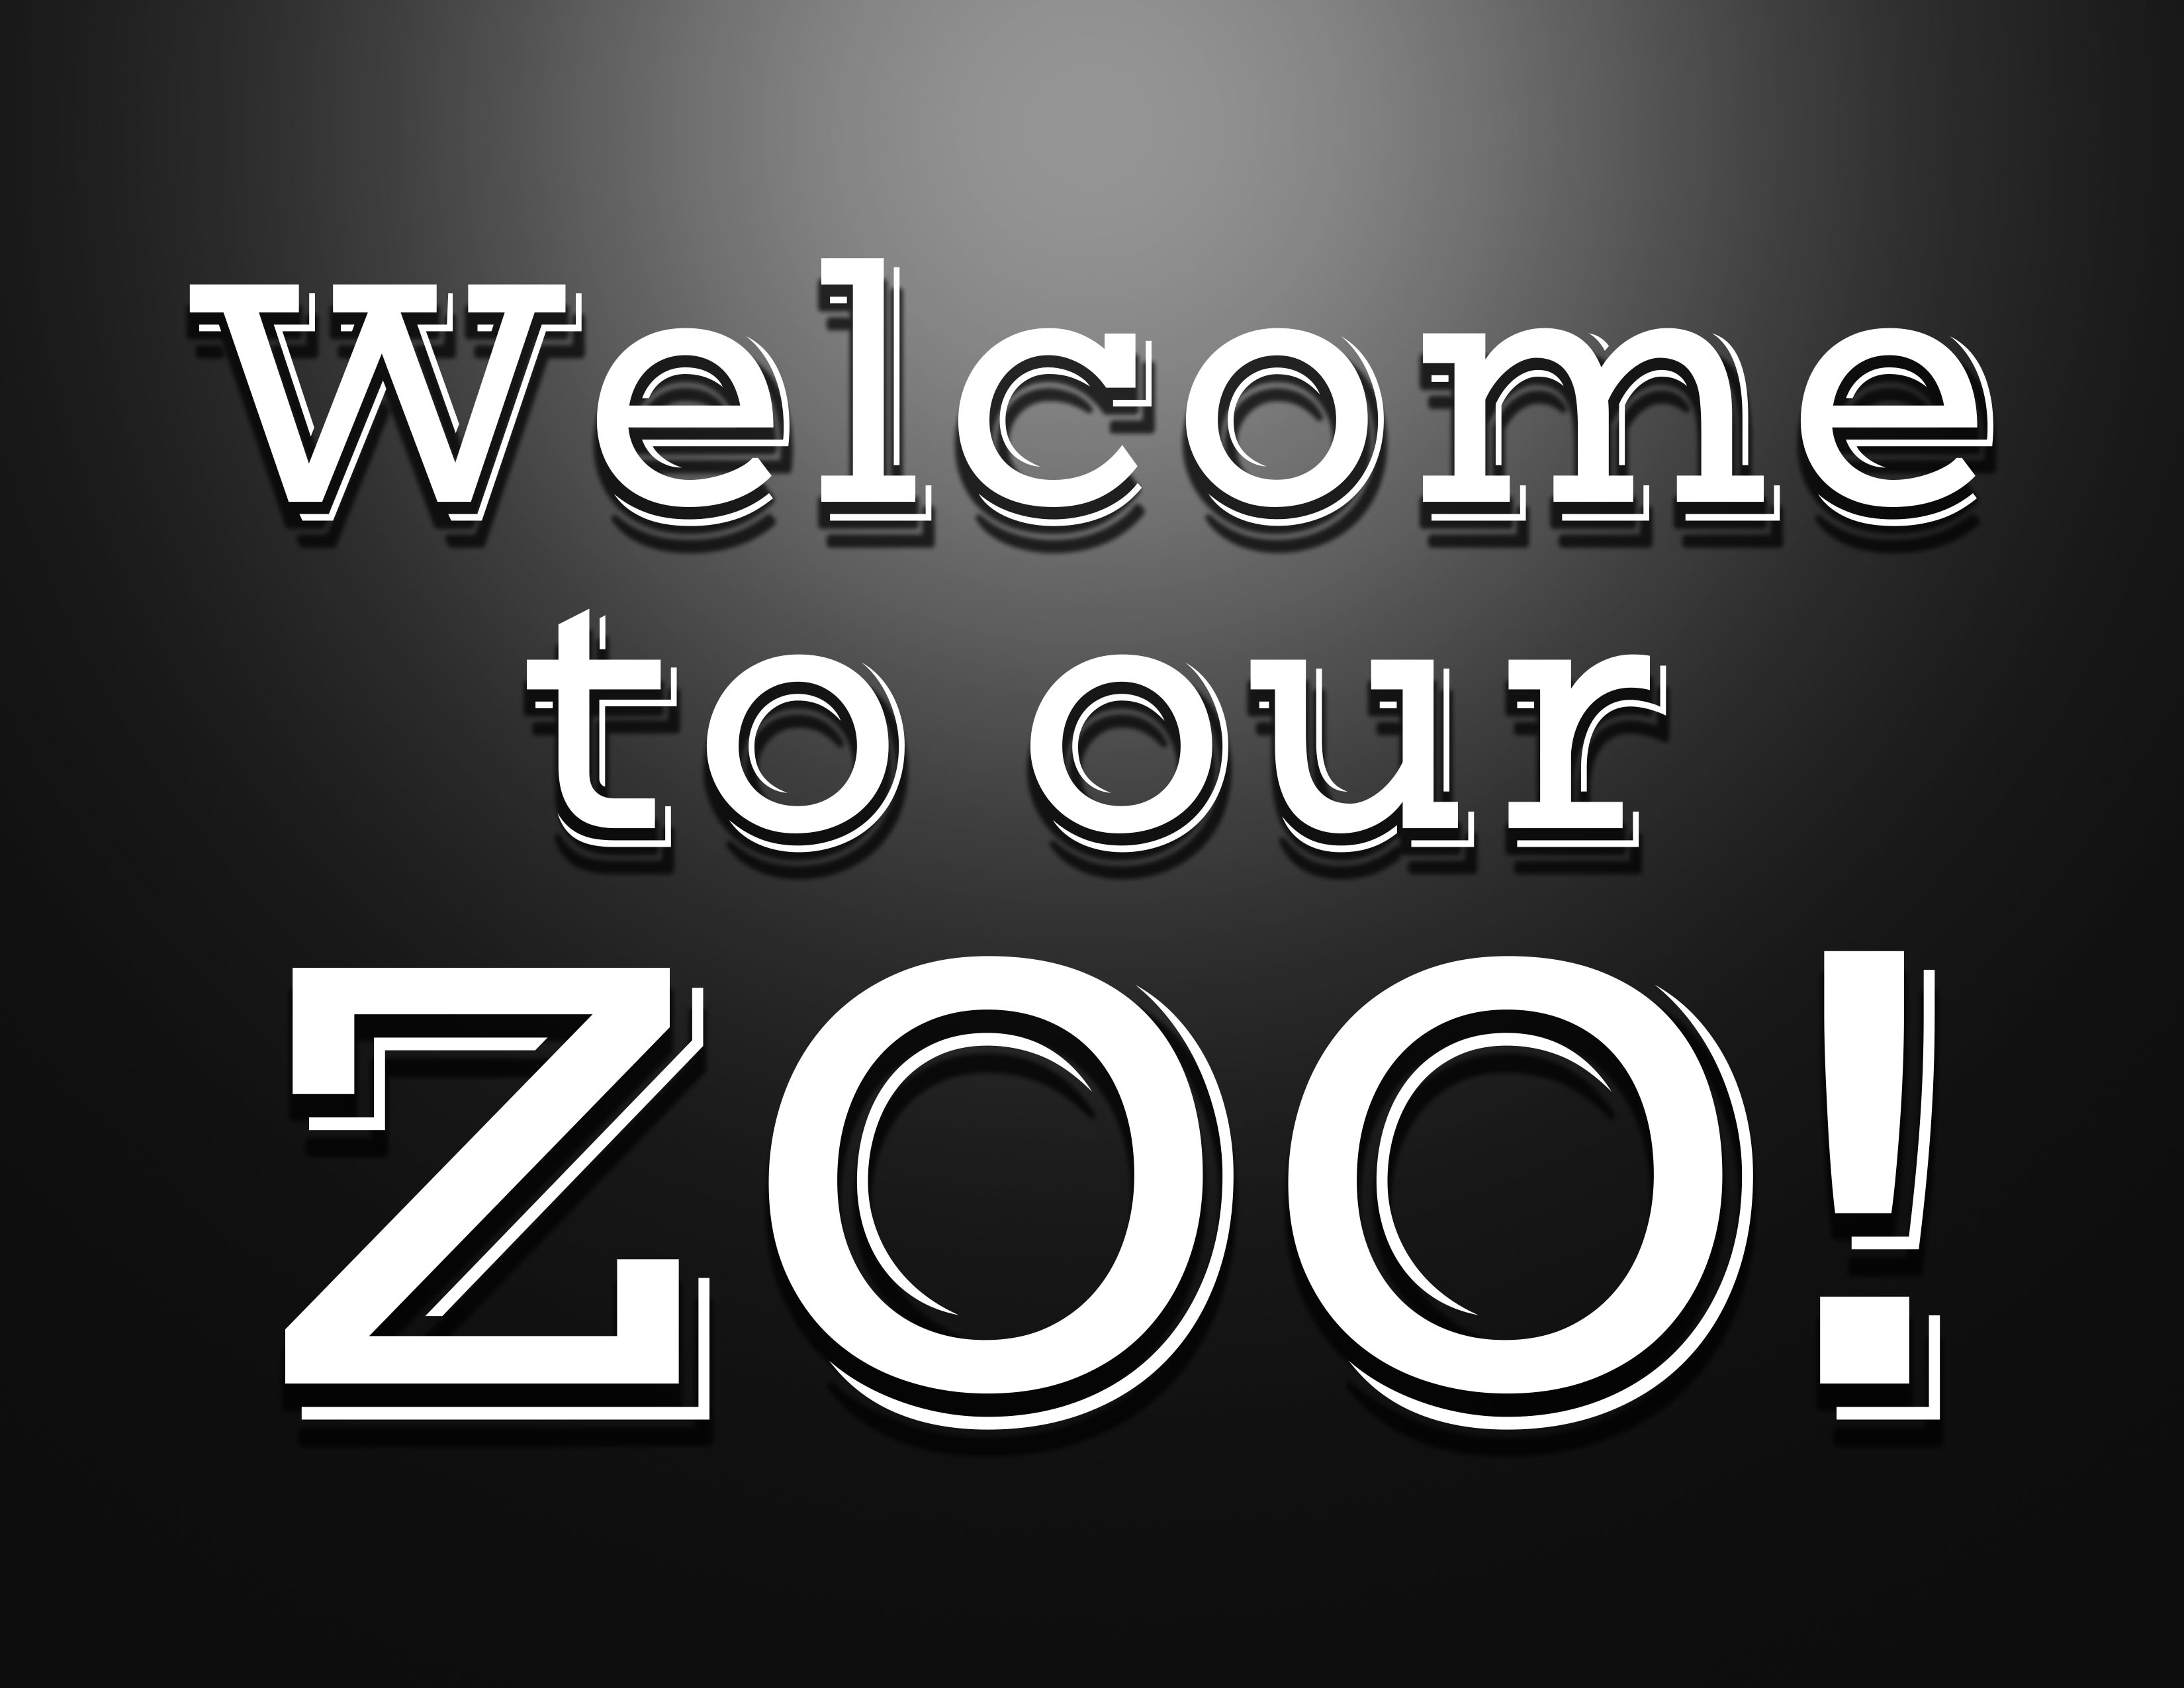 Photo Prop - Welcome_to_our_zoo